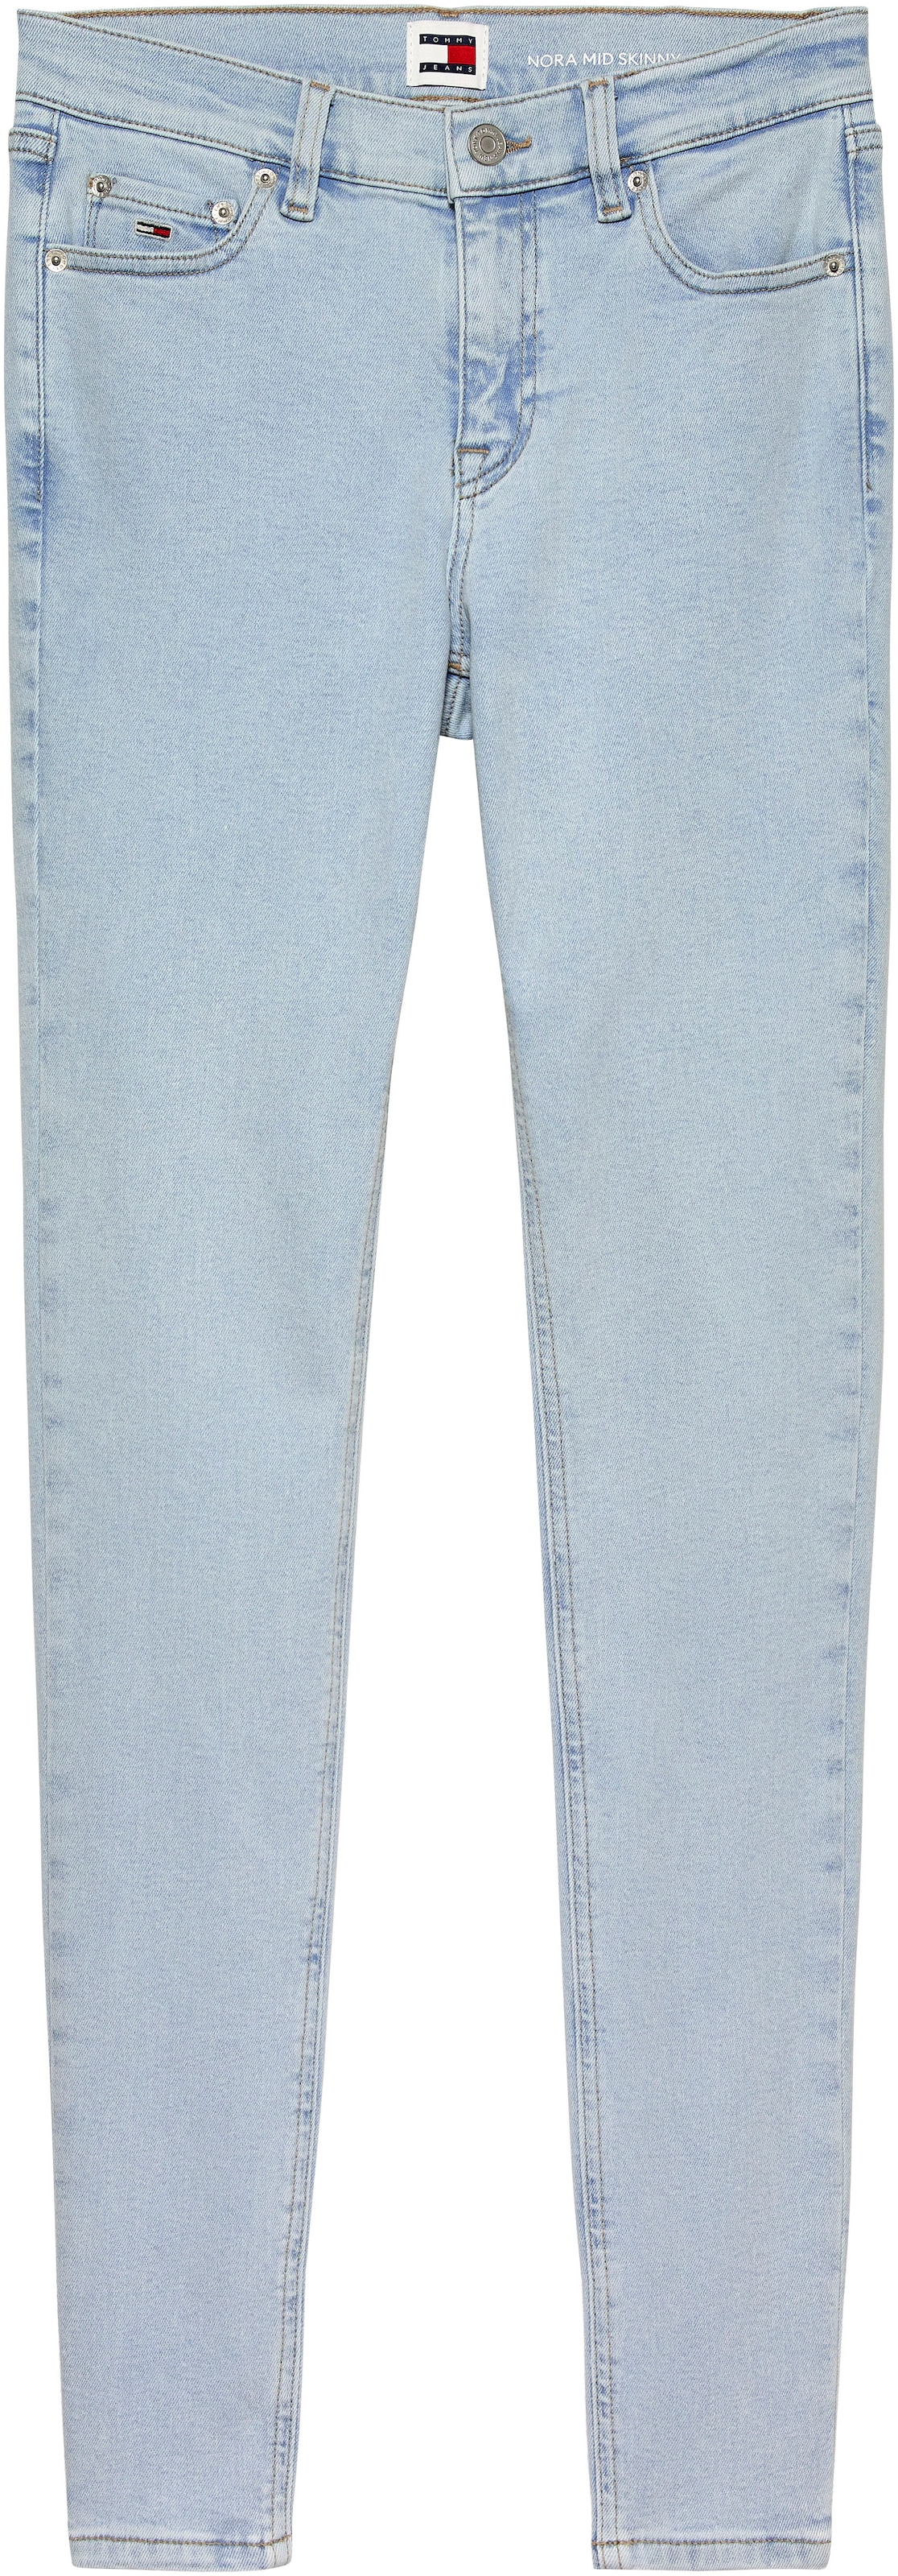 Jeans Label-Badge Shop mit & Online OTTO Tommy Skinny-fit-Jeans Passe Tommy »Nora«, hinten im Jeans